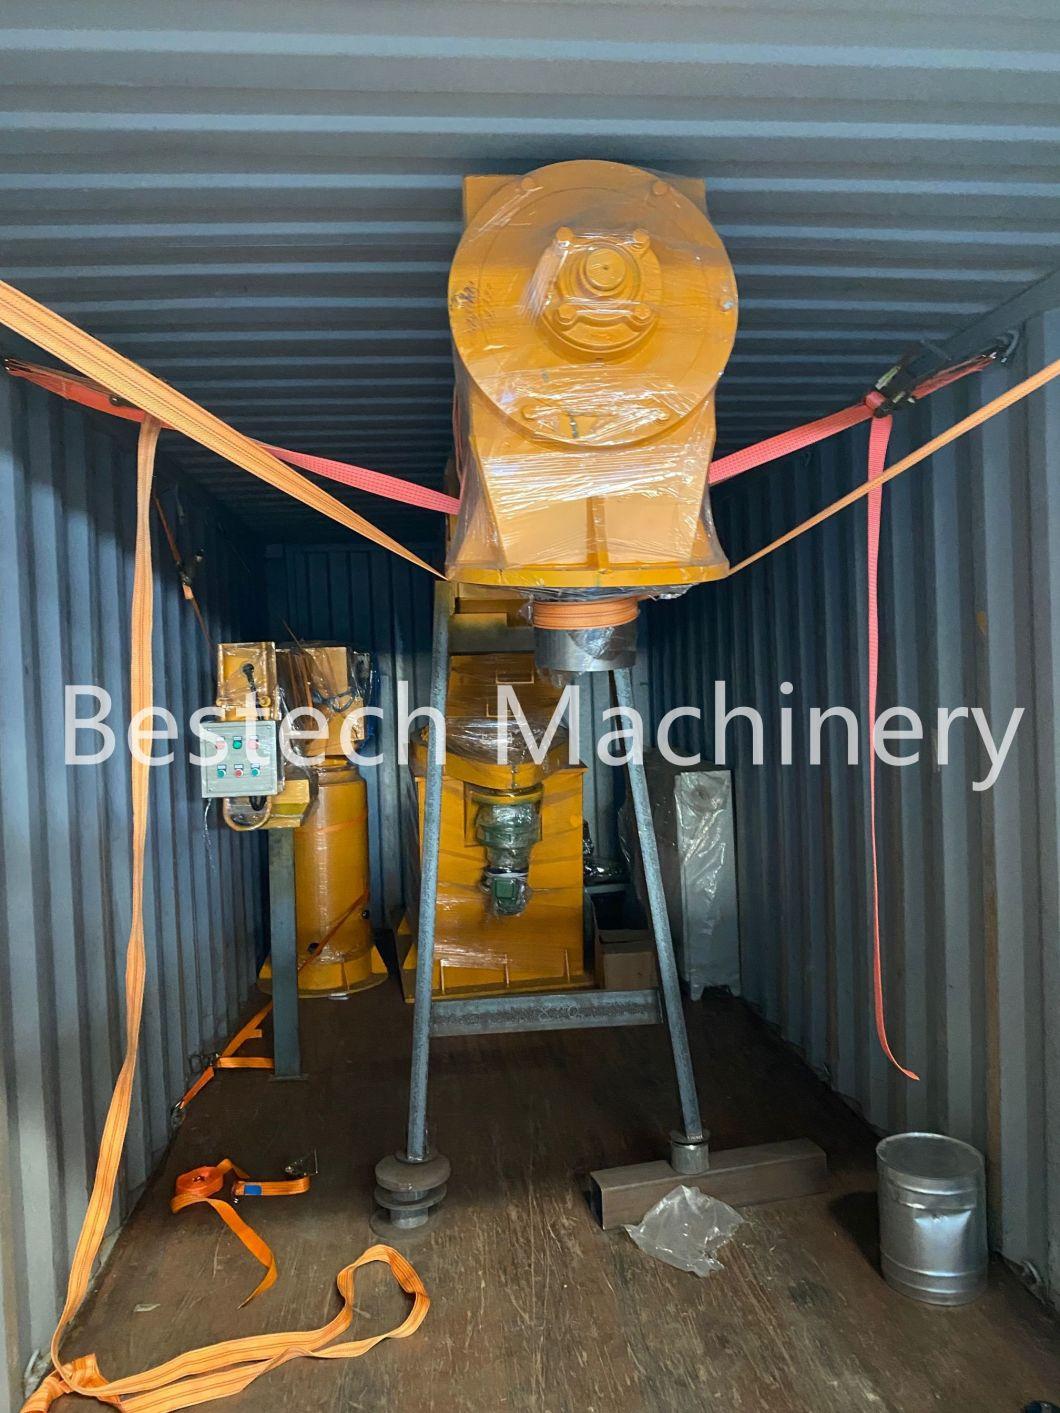 Price Discount Double Arm Resin Sand Mixer/Foundry Sand Mixing Machine